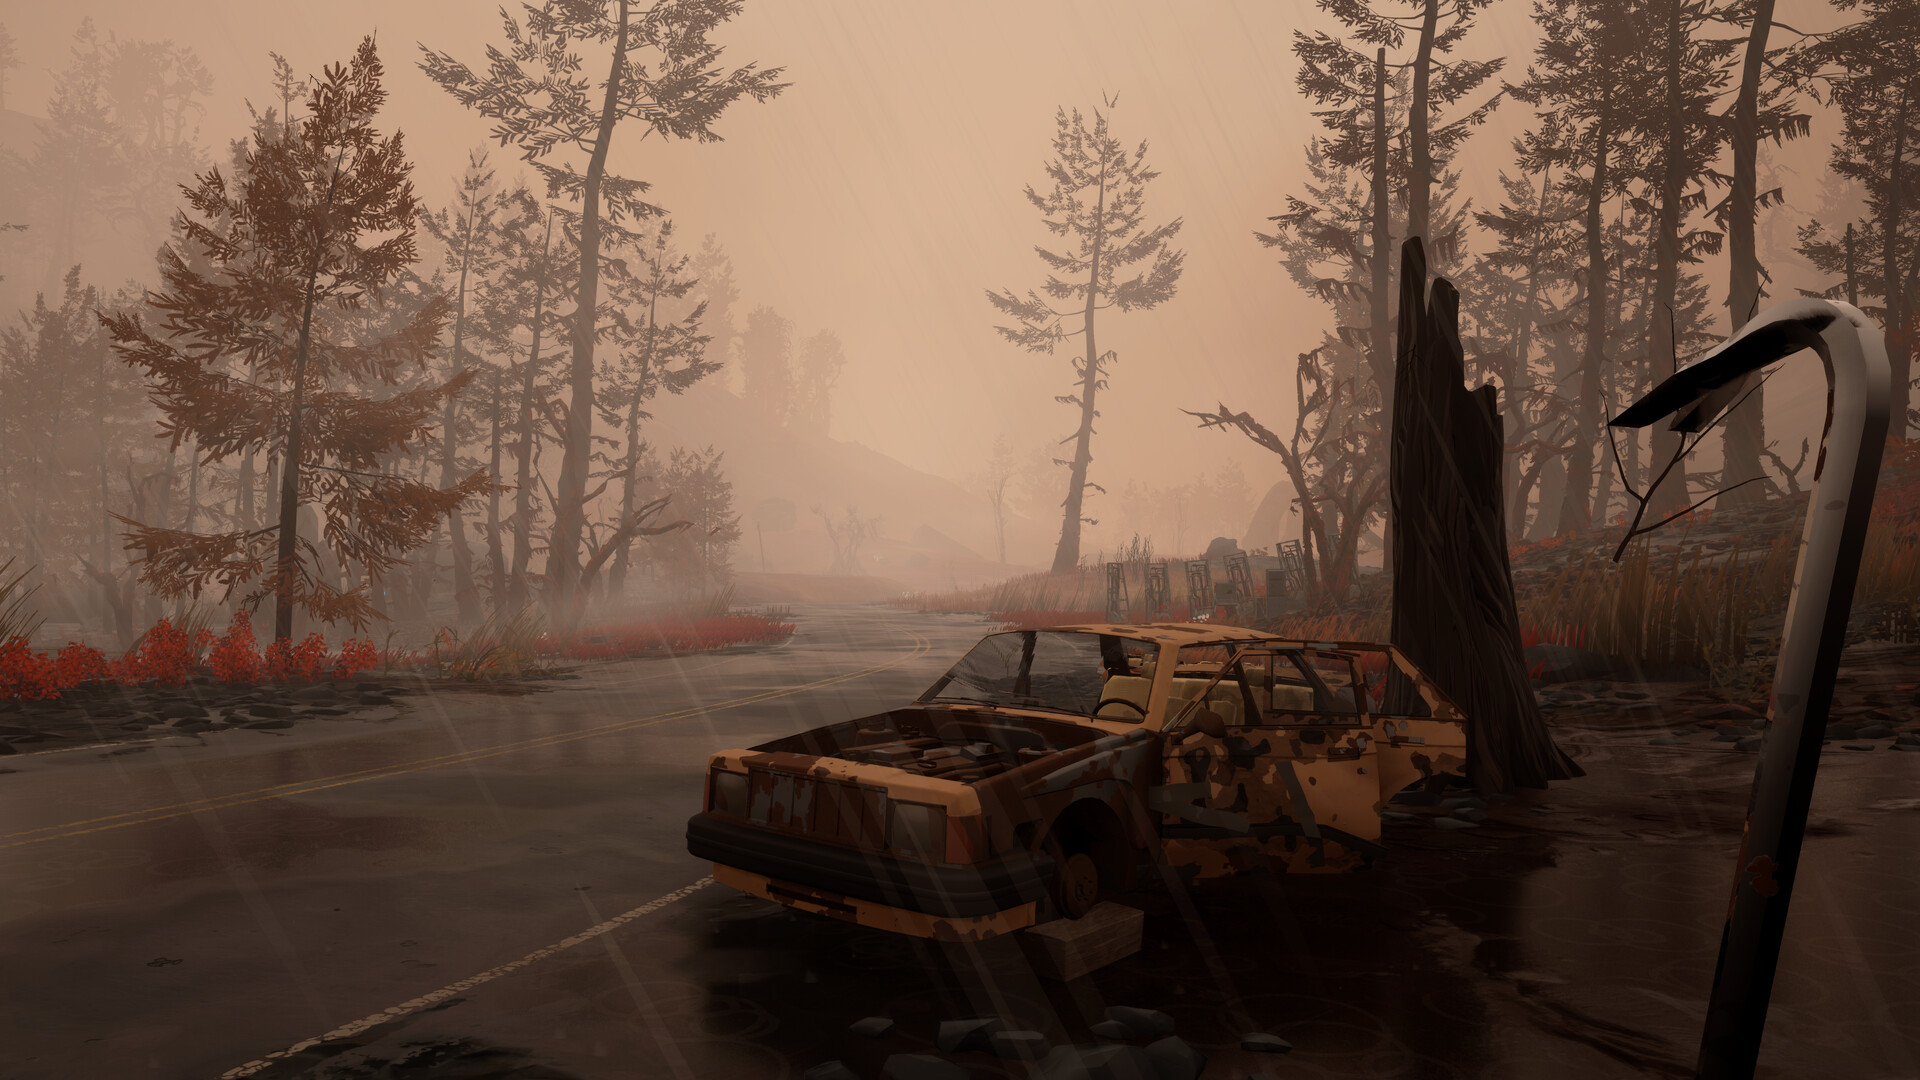 A screenshot from Pacific Drive with the character holding a crow bar in the rain in front of a wrecked car